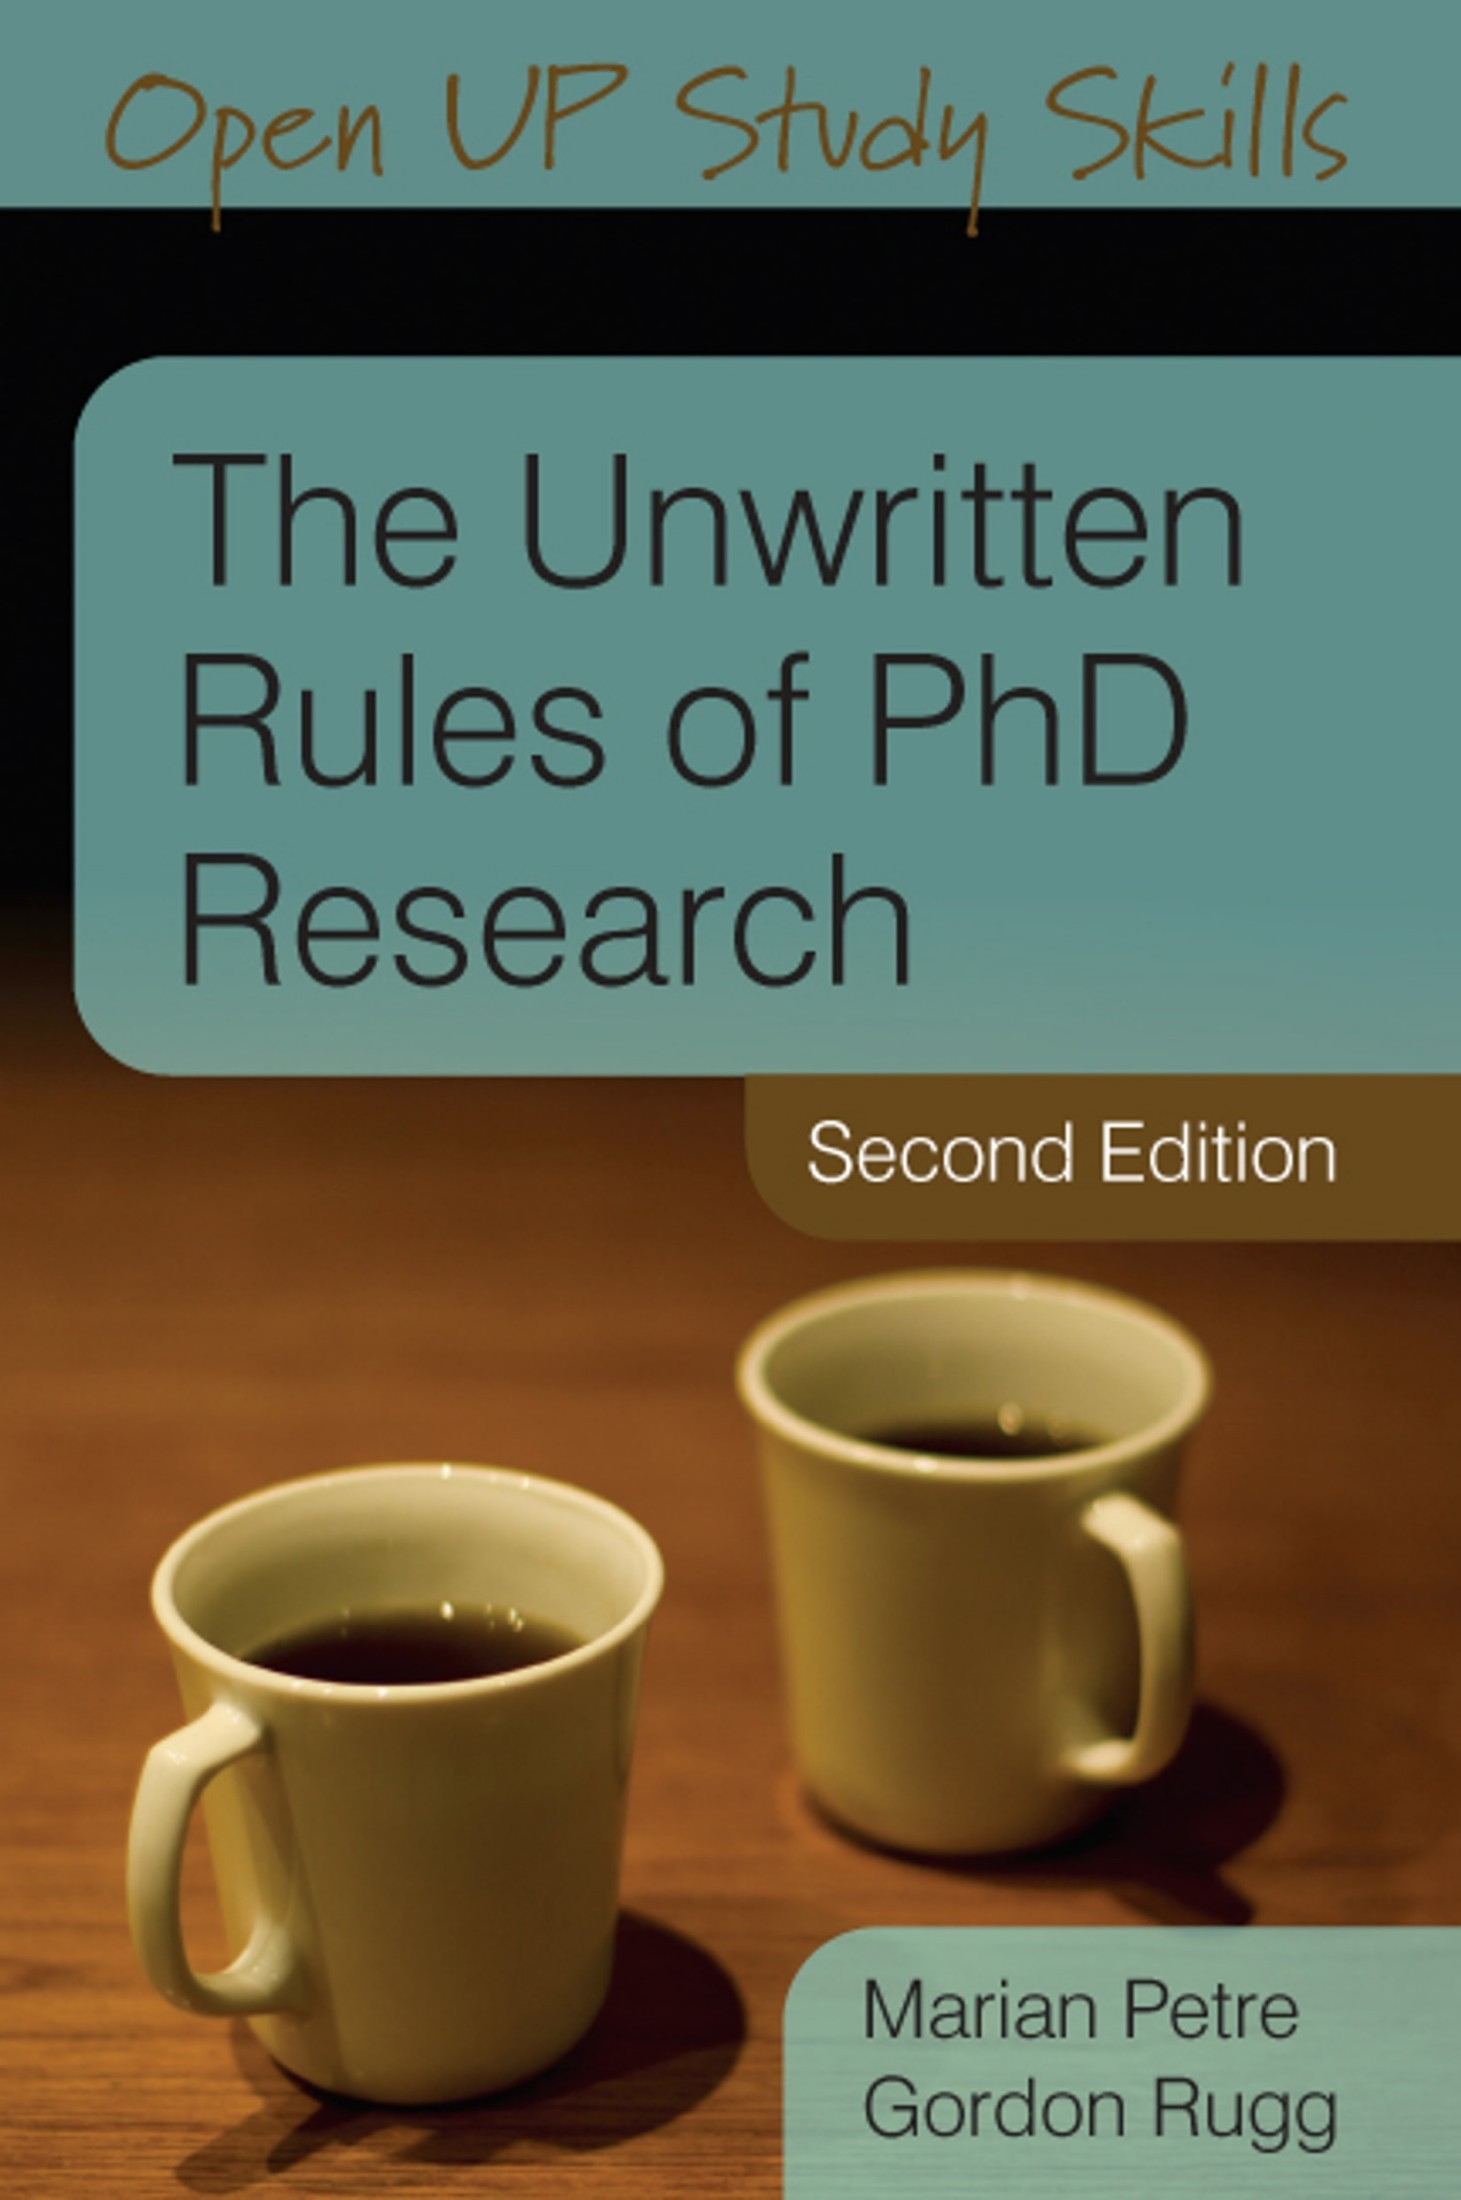 The Unwritten Rules of Phd Research - Second Edition